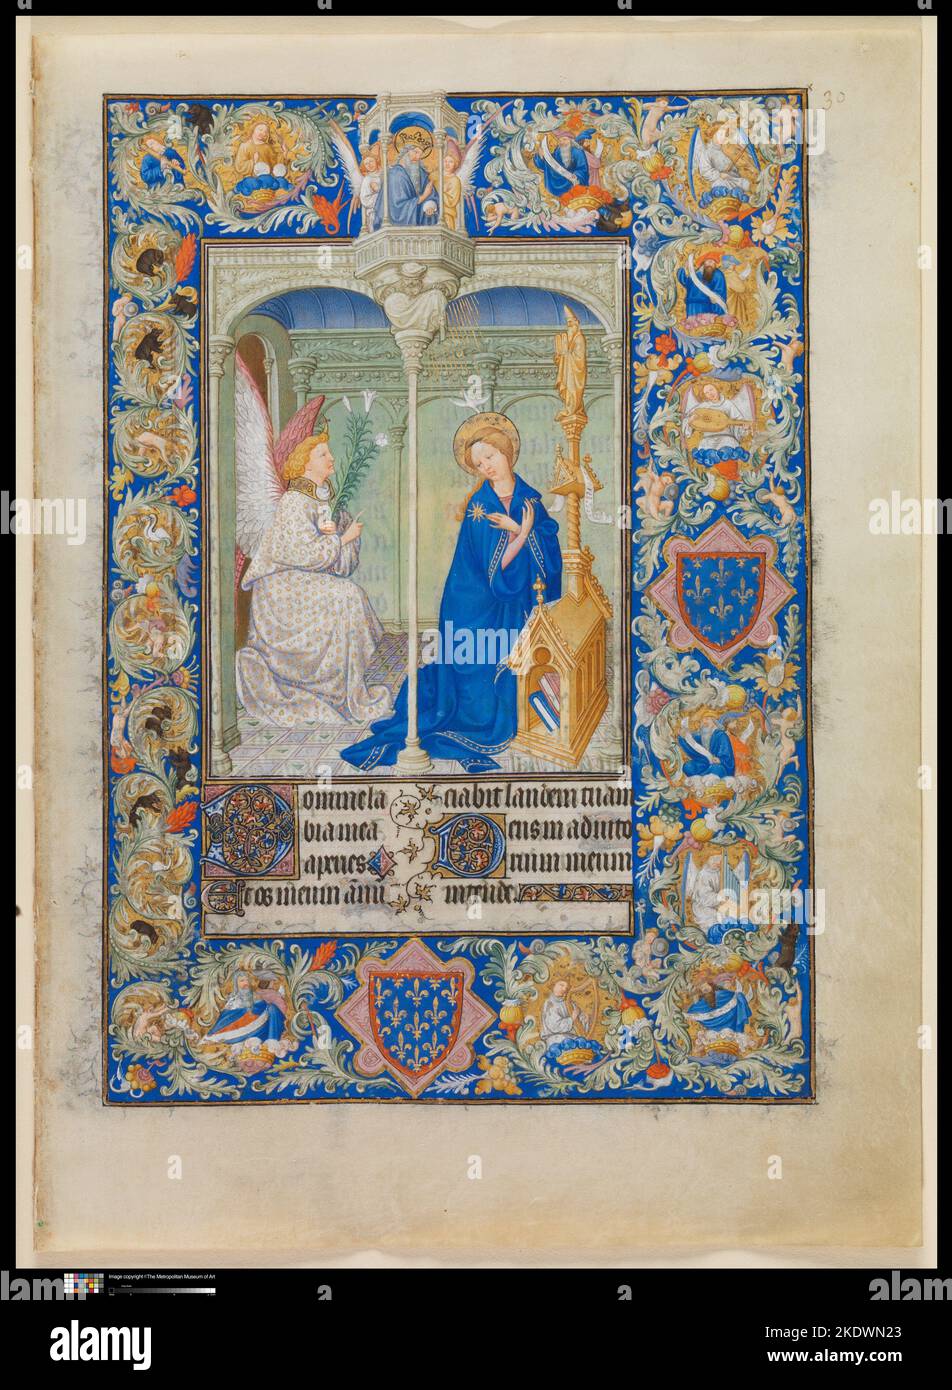 he Belles Heures of Jean de France, duc de Berry. Artist: The Limbourg Brothers (Franco-Netherlandish, active France, by 1399-1416). Culture: French. Dimensions: Single leaf, Overall: 9 3/8 x 6 11/16 in. (23.8 x 17 cm); Double leaf, Overall: 9 3/8 x 13 7/16 in. (23.8 x 34.1 cm). Date: 1405-1408/1409. Technique/material: Tempera, gold, and ink on vellum Stock Photo